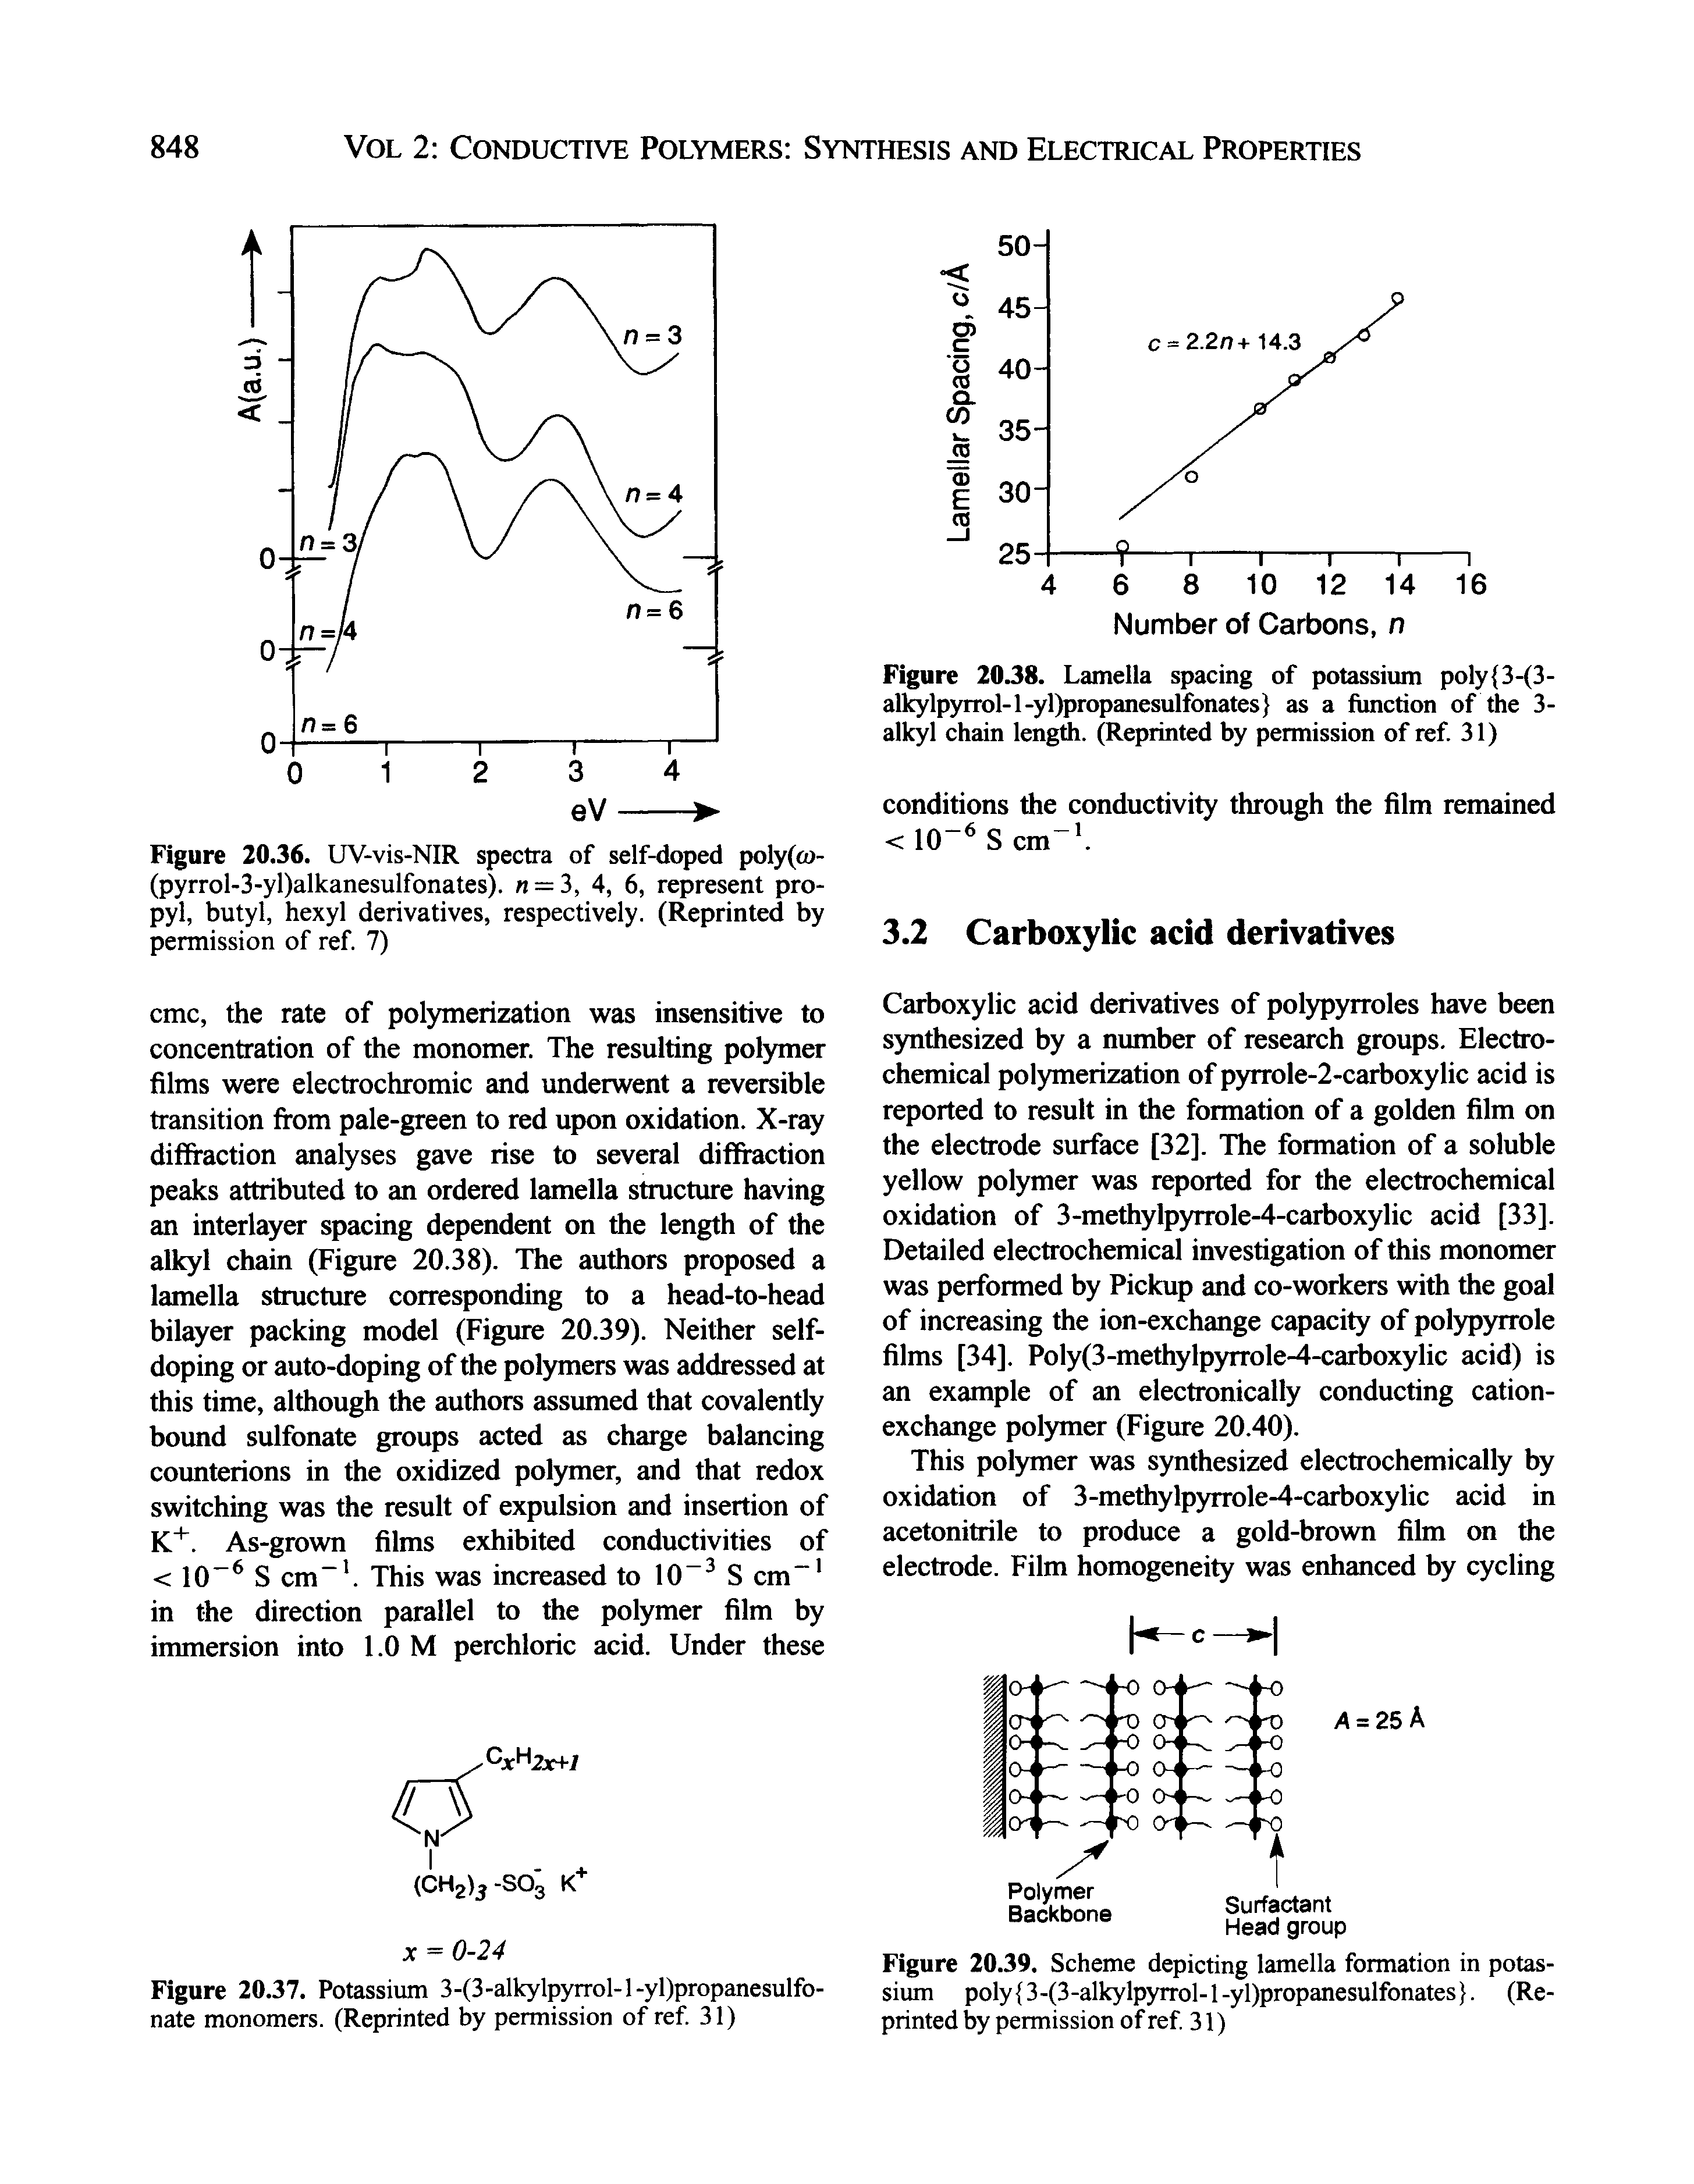 Figure 2038. Lamella spacing of potassium poly 3-(3-alkylp5rrrol-l-yl)propanesulfonates as a fimction of the 3-alkyl chain length. (Reprinted by permission of ref. 31)...